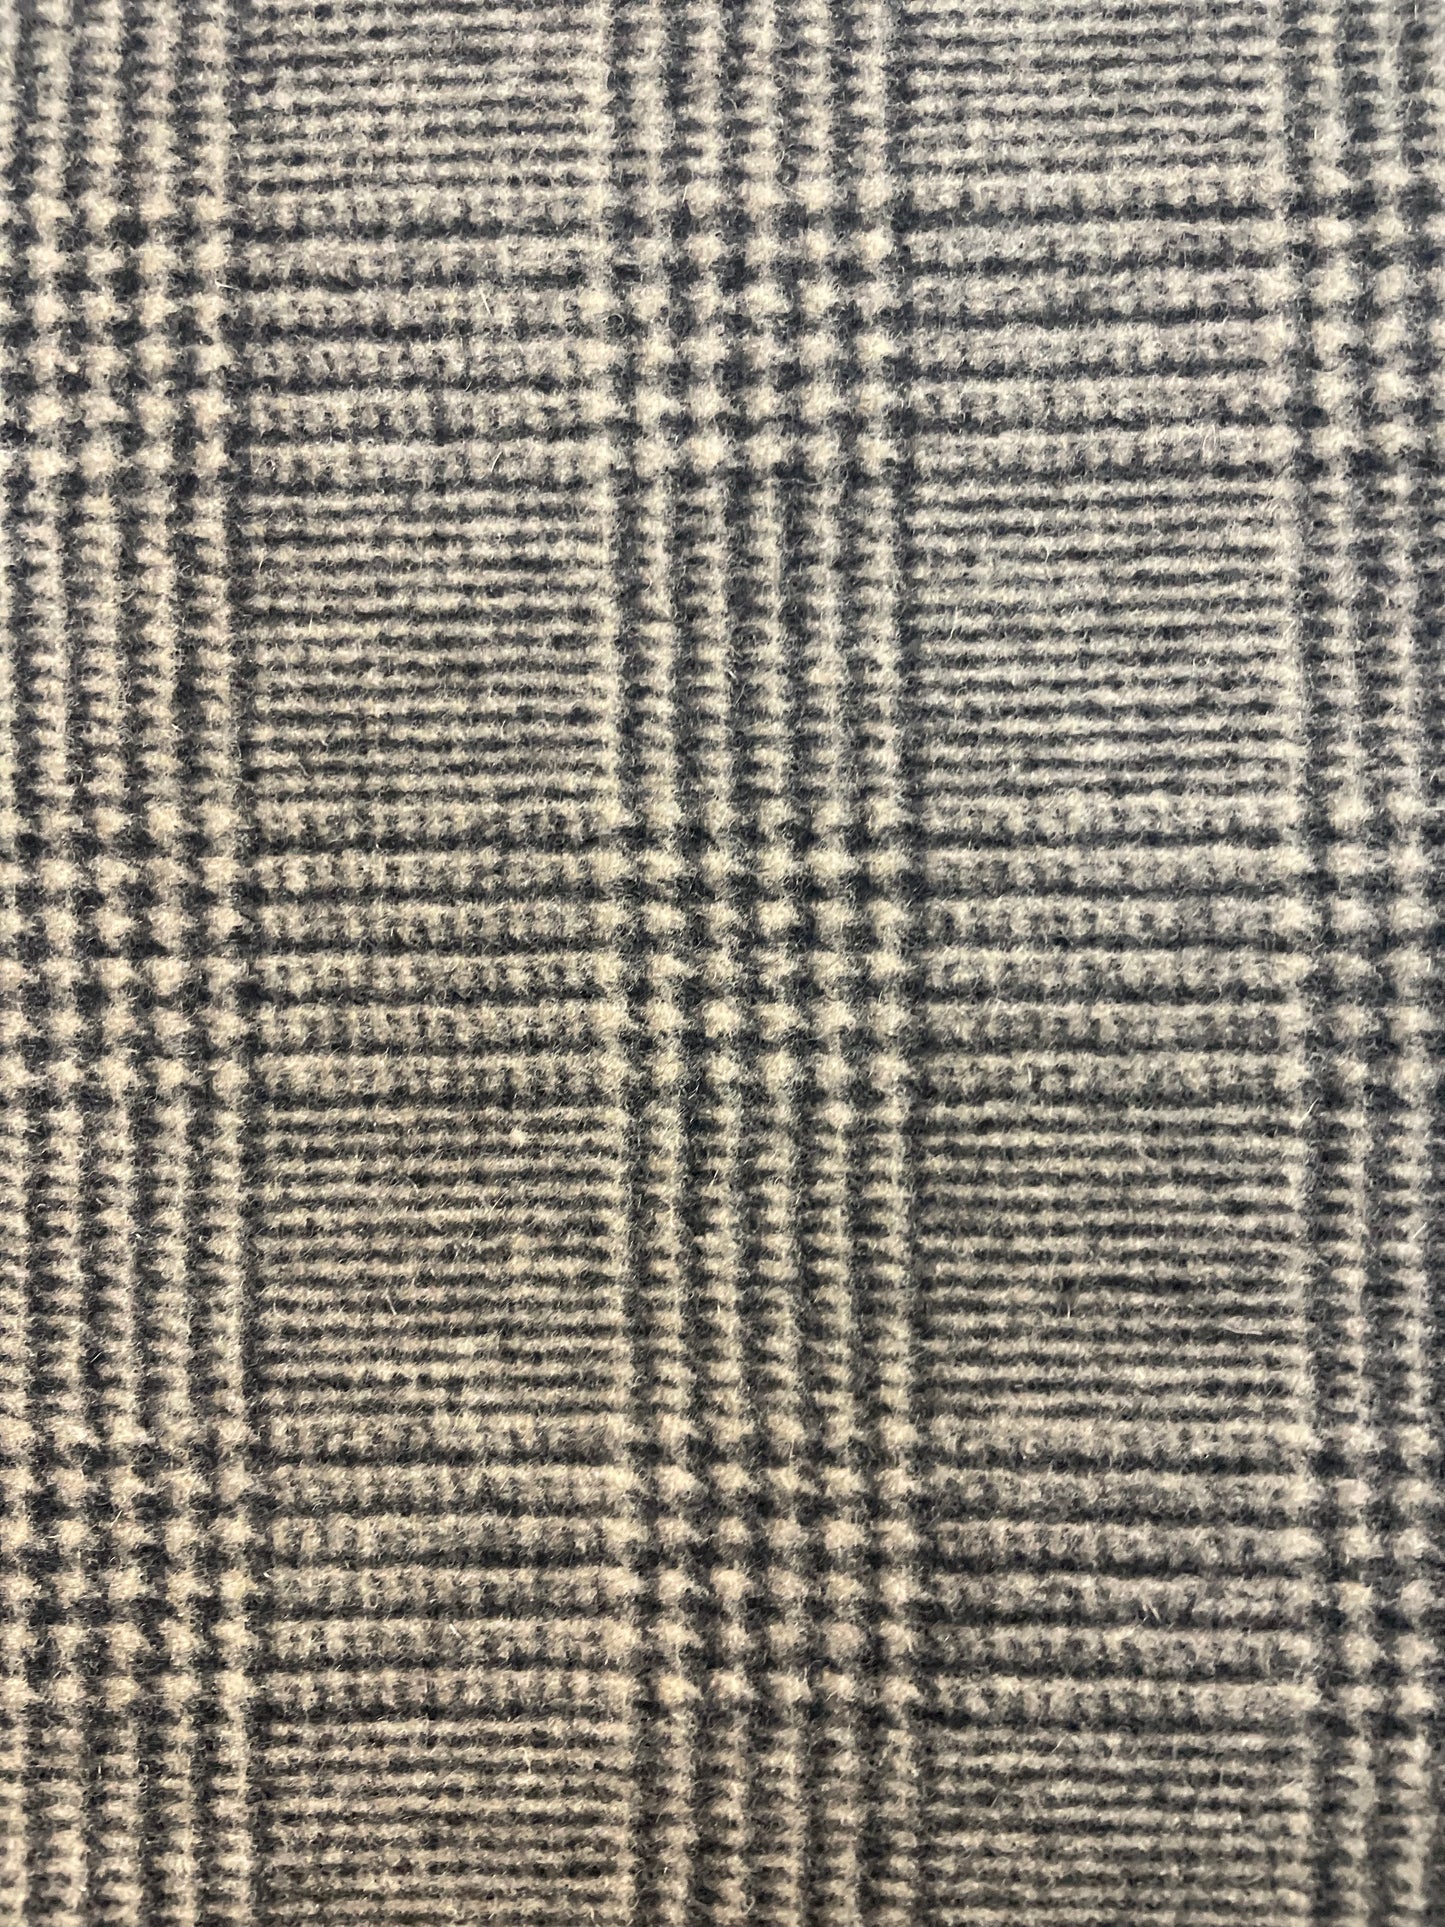 Italian Double Face Melton Wool - Plaid & Houndstooth